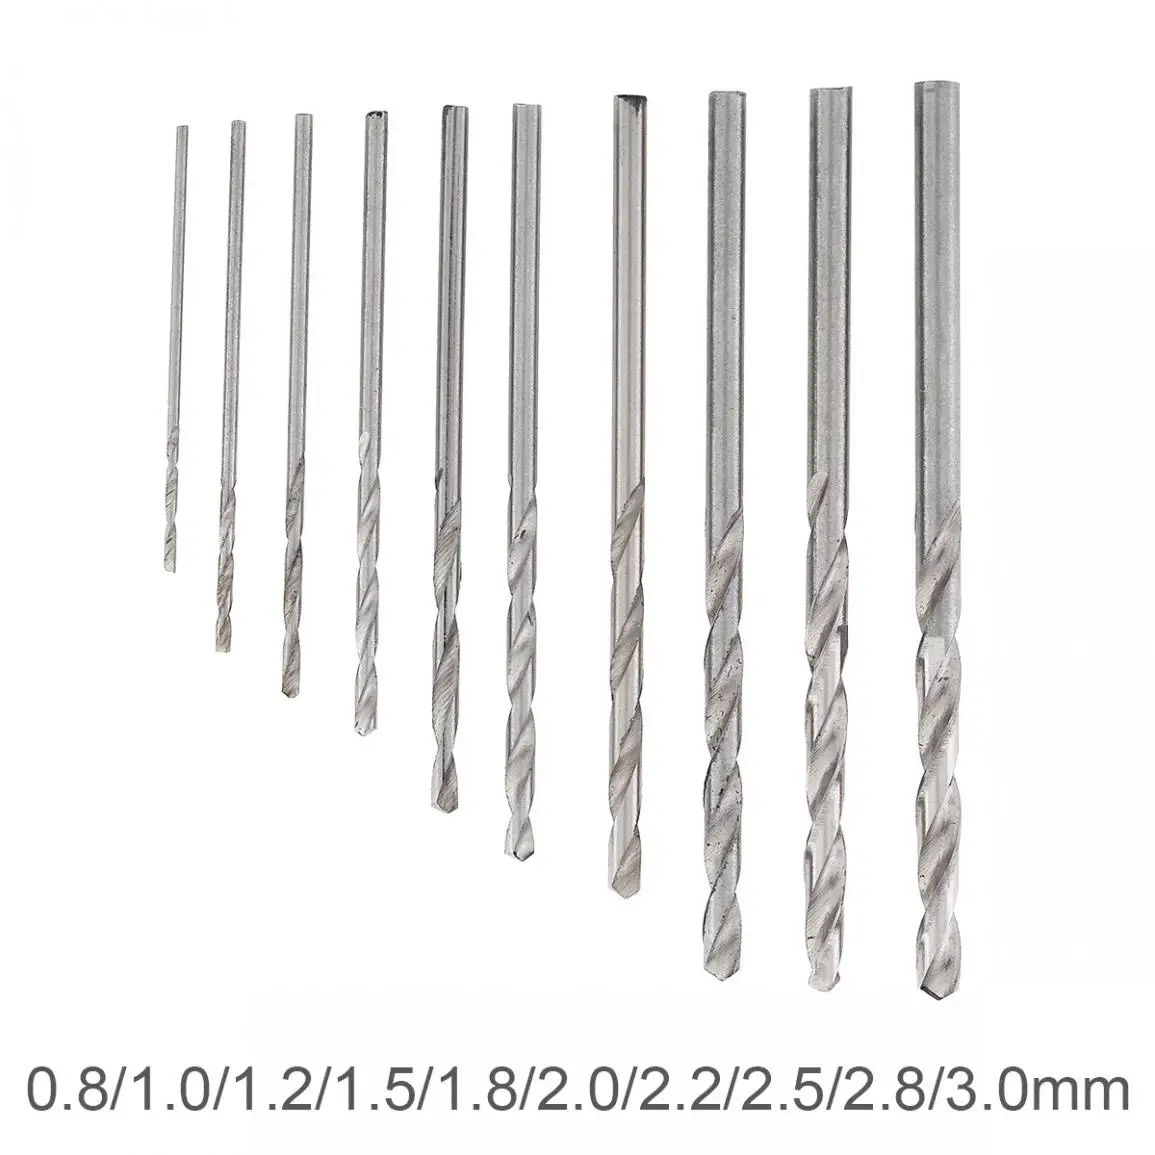 10pcs/lot High Speed Metric HSS Twist Drill Bits Coated Set 0.8MM-3.0MM Stainless Steel Small Cutting Resistance for Hole Punch